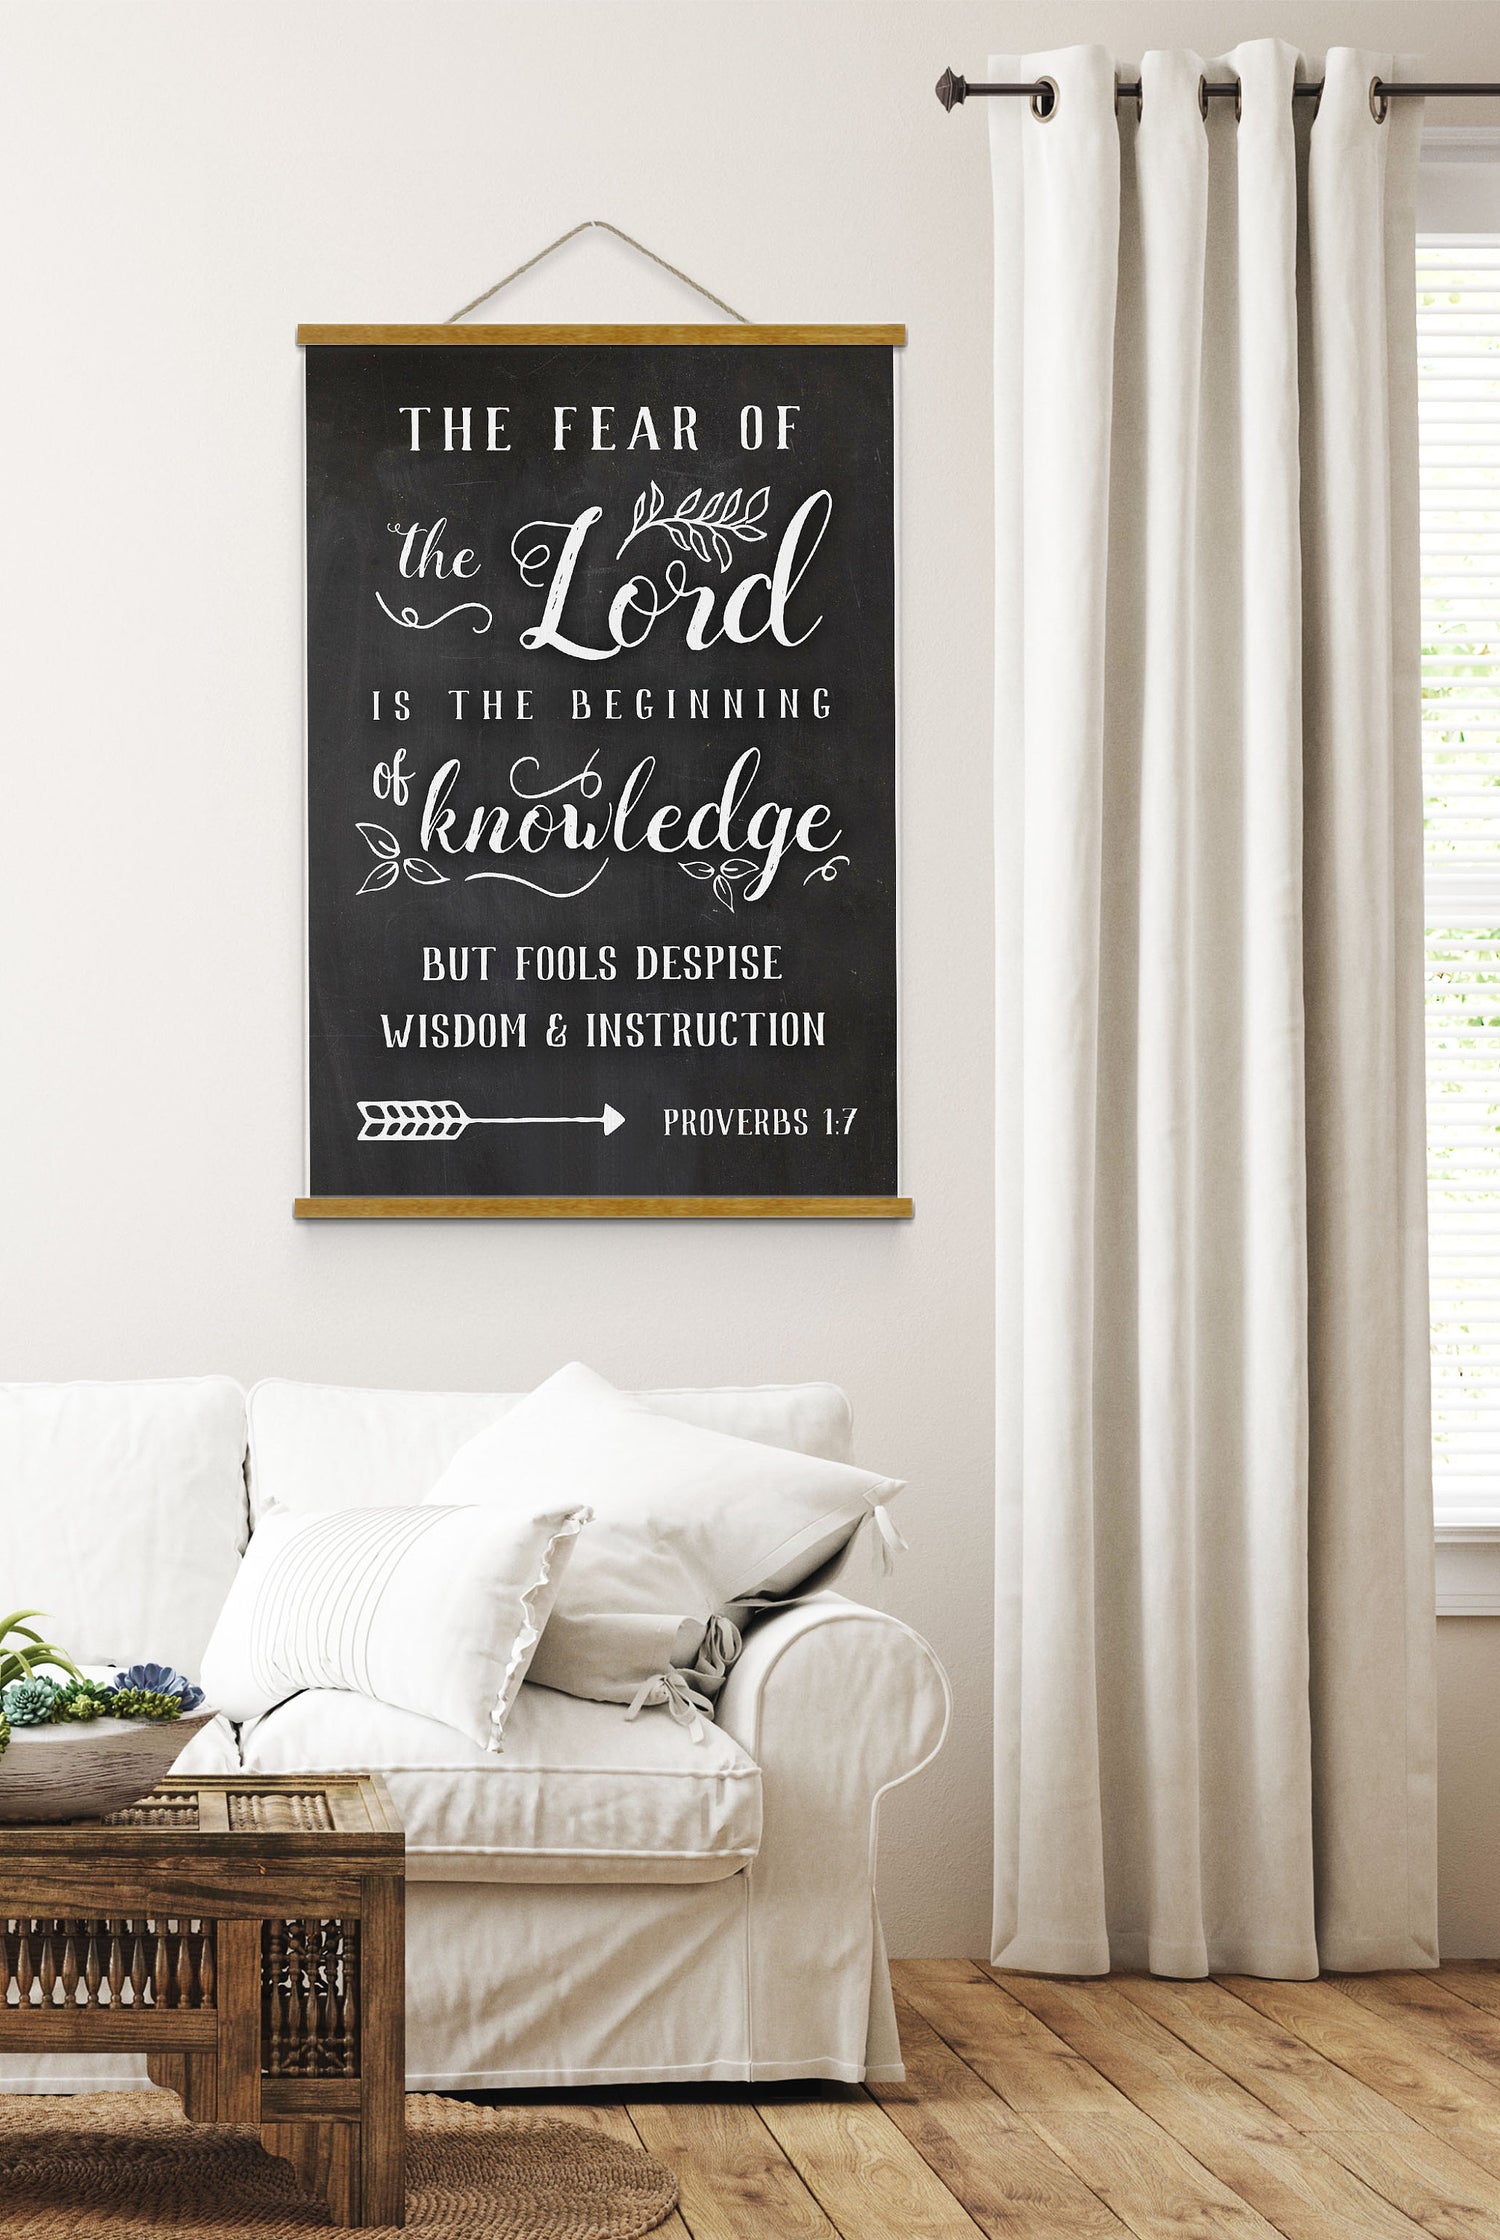 The Fear of the Lord is the Beginning of knowledge | Bible Verse Hanging Canvas | Proverbs 1:7 Scripture Wall Art Wood Hanging Canvas